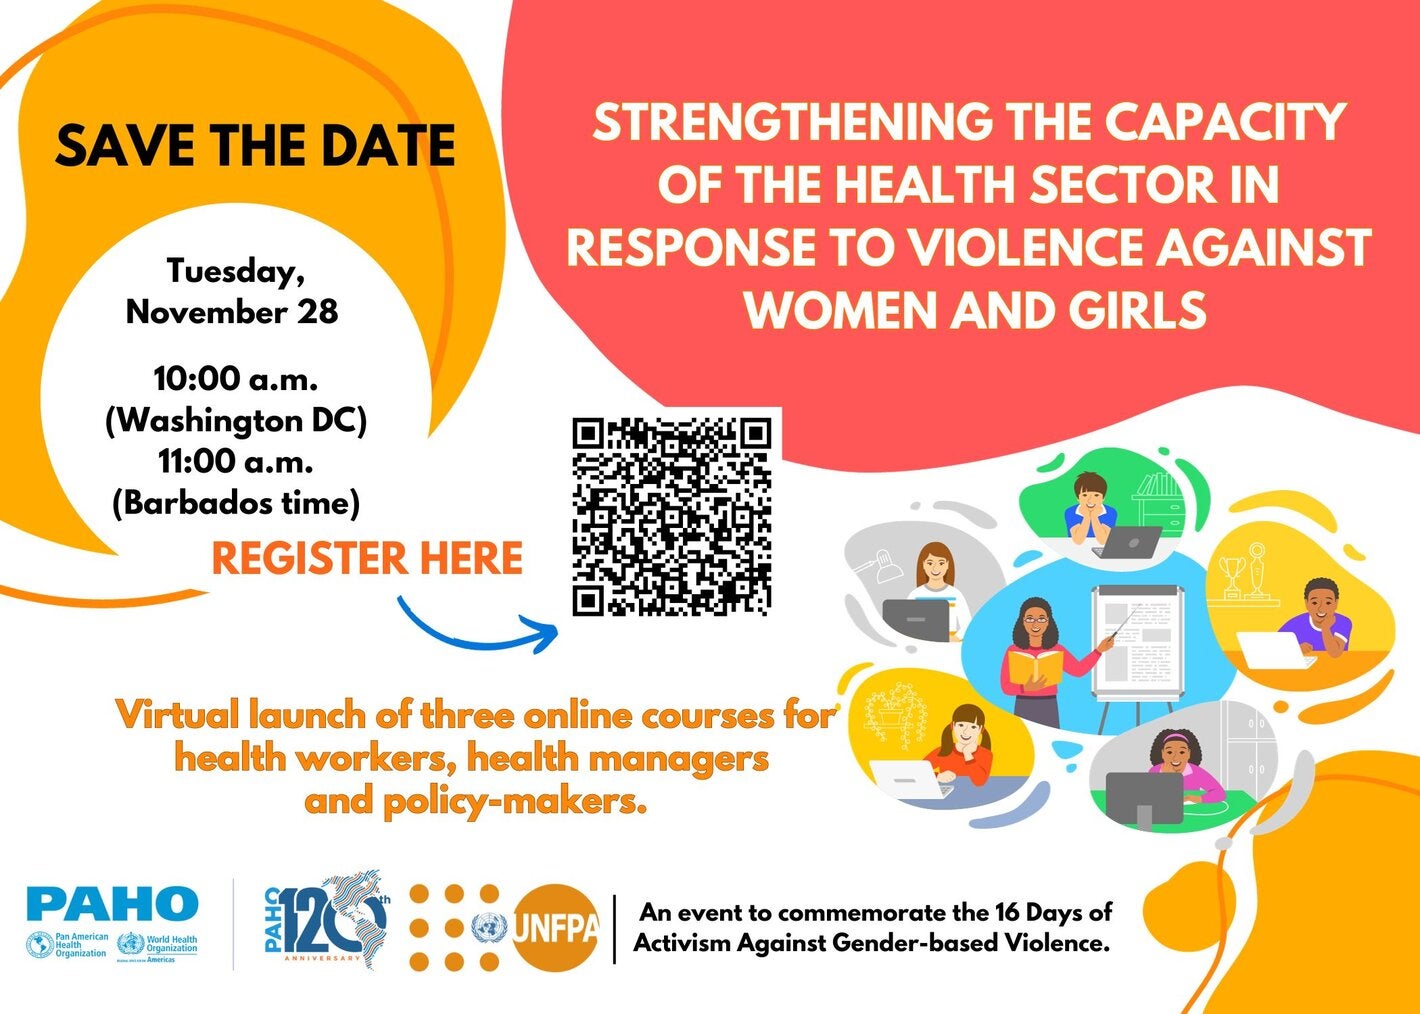 Strengthening the capacity of the health sector in response to violence against women and girls